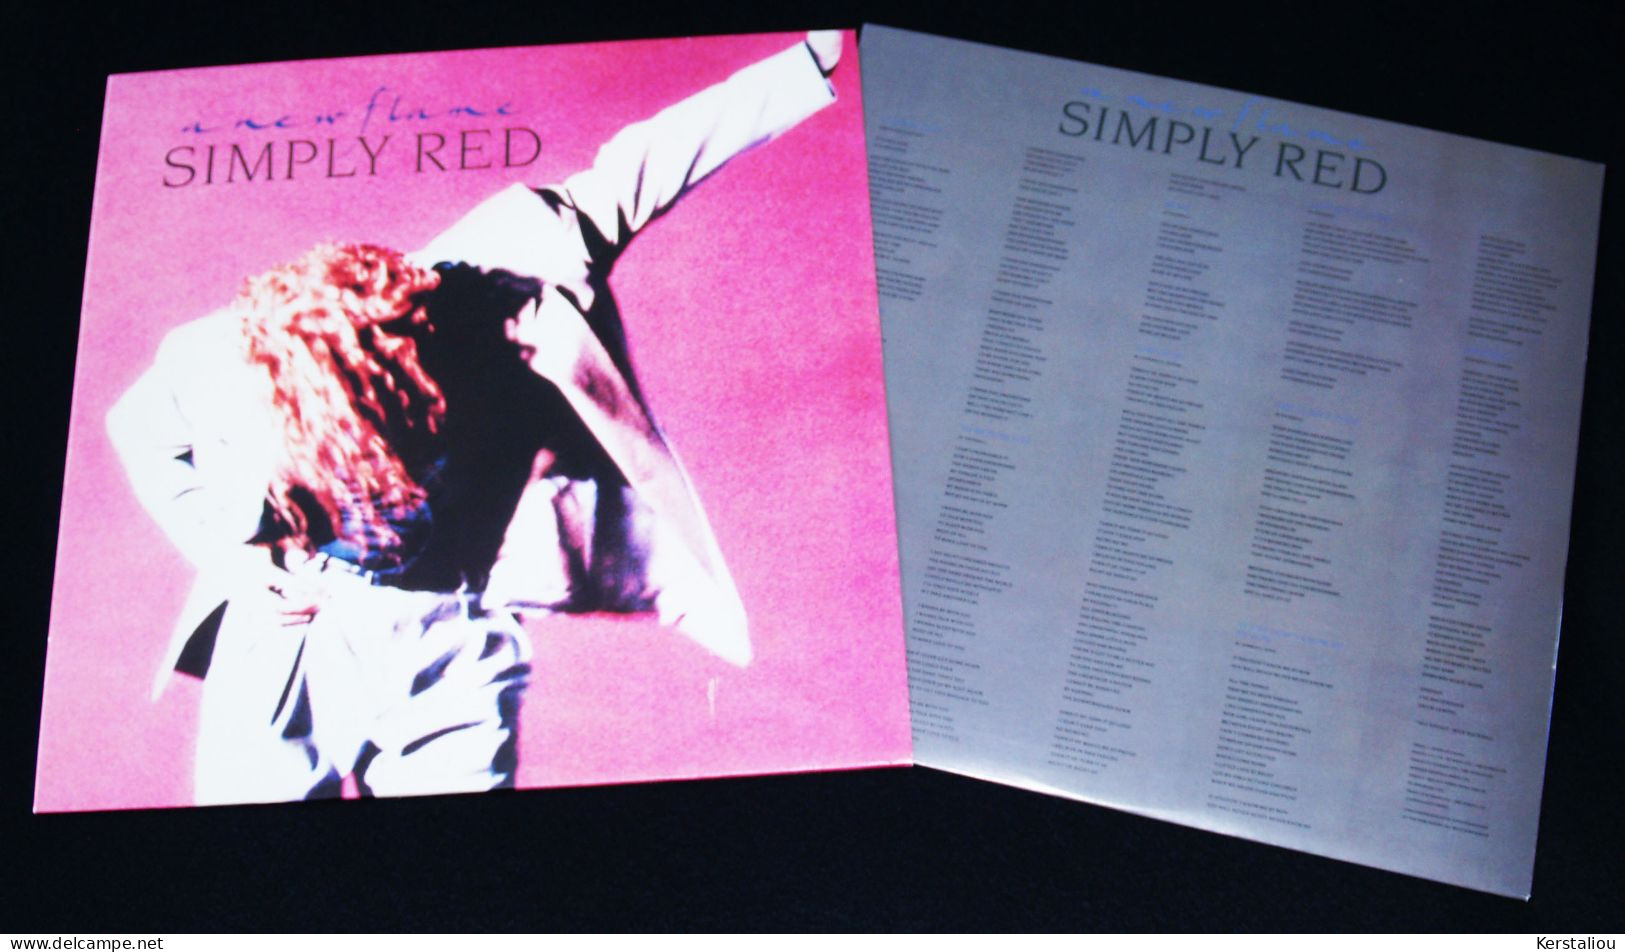 SIMPLY RED – "A New Flame" – LP – 1989 – 244689-1 – ELEKTRA/WEA – Made In Germany - Soul - R&B